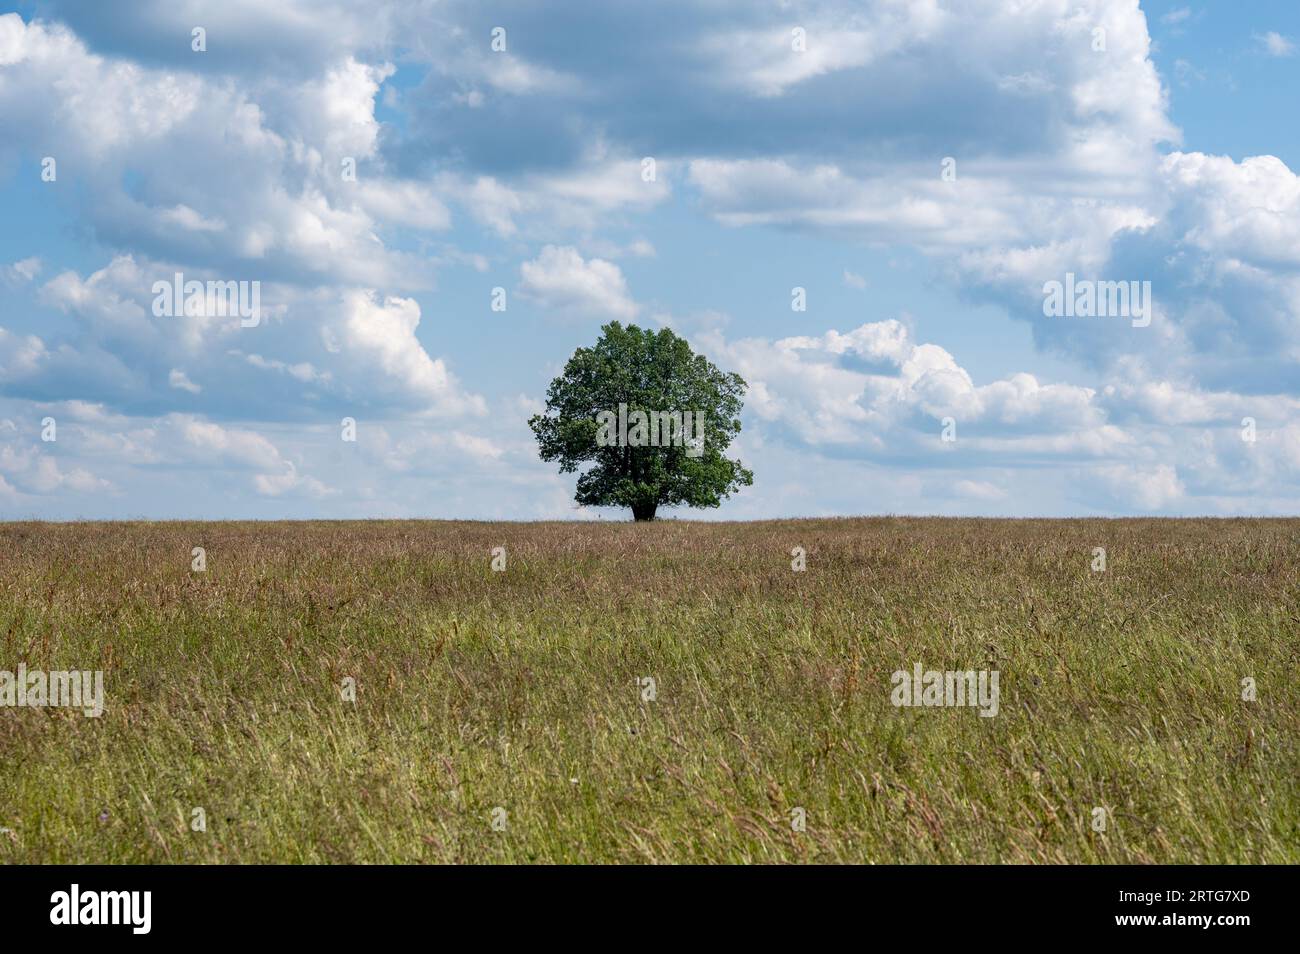 A tree in the middle of a field with blue sky and clouds Stock Photo